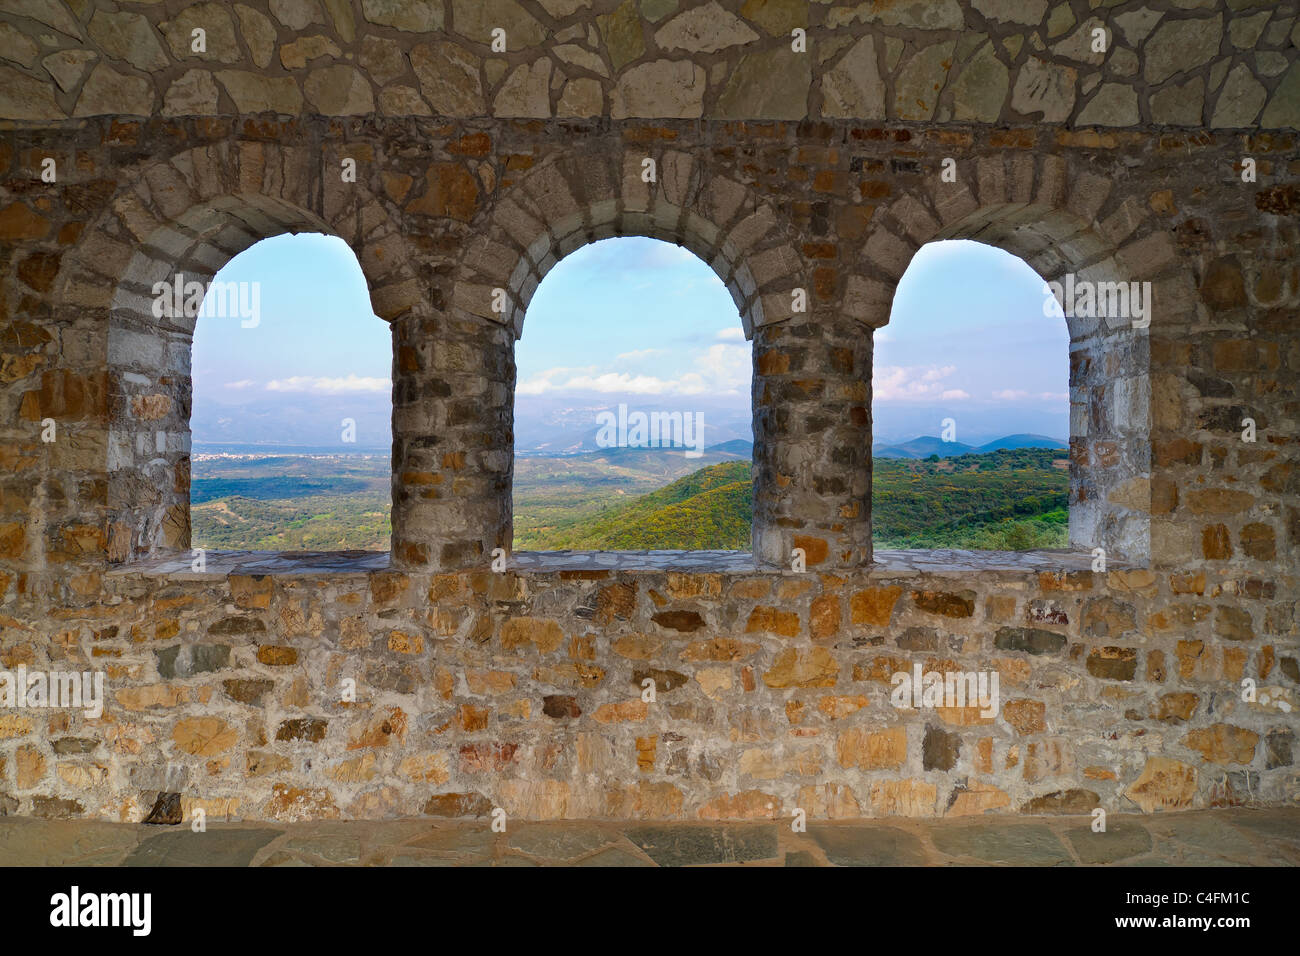 View through the windows of a Greek monastery towards the natural surroundings Stock Photo